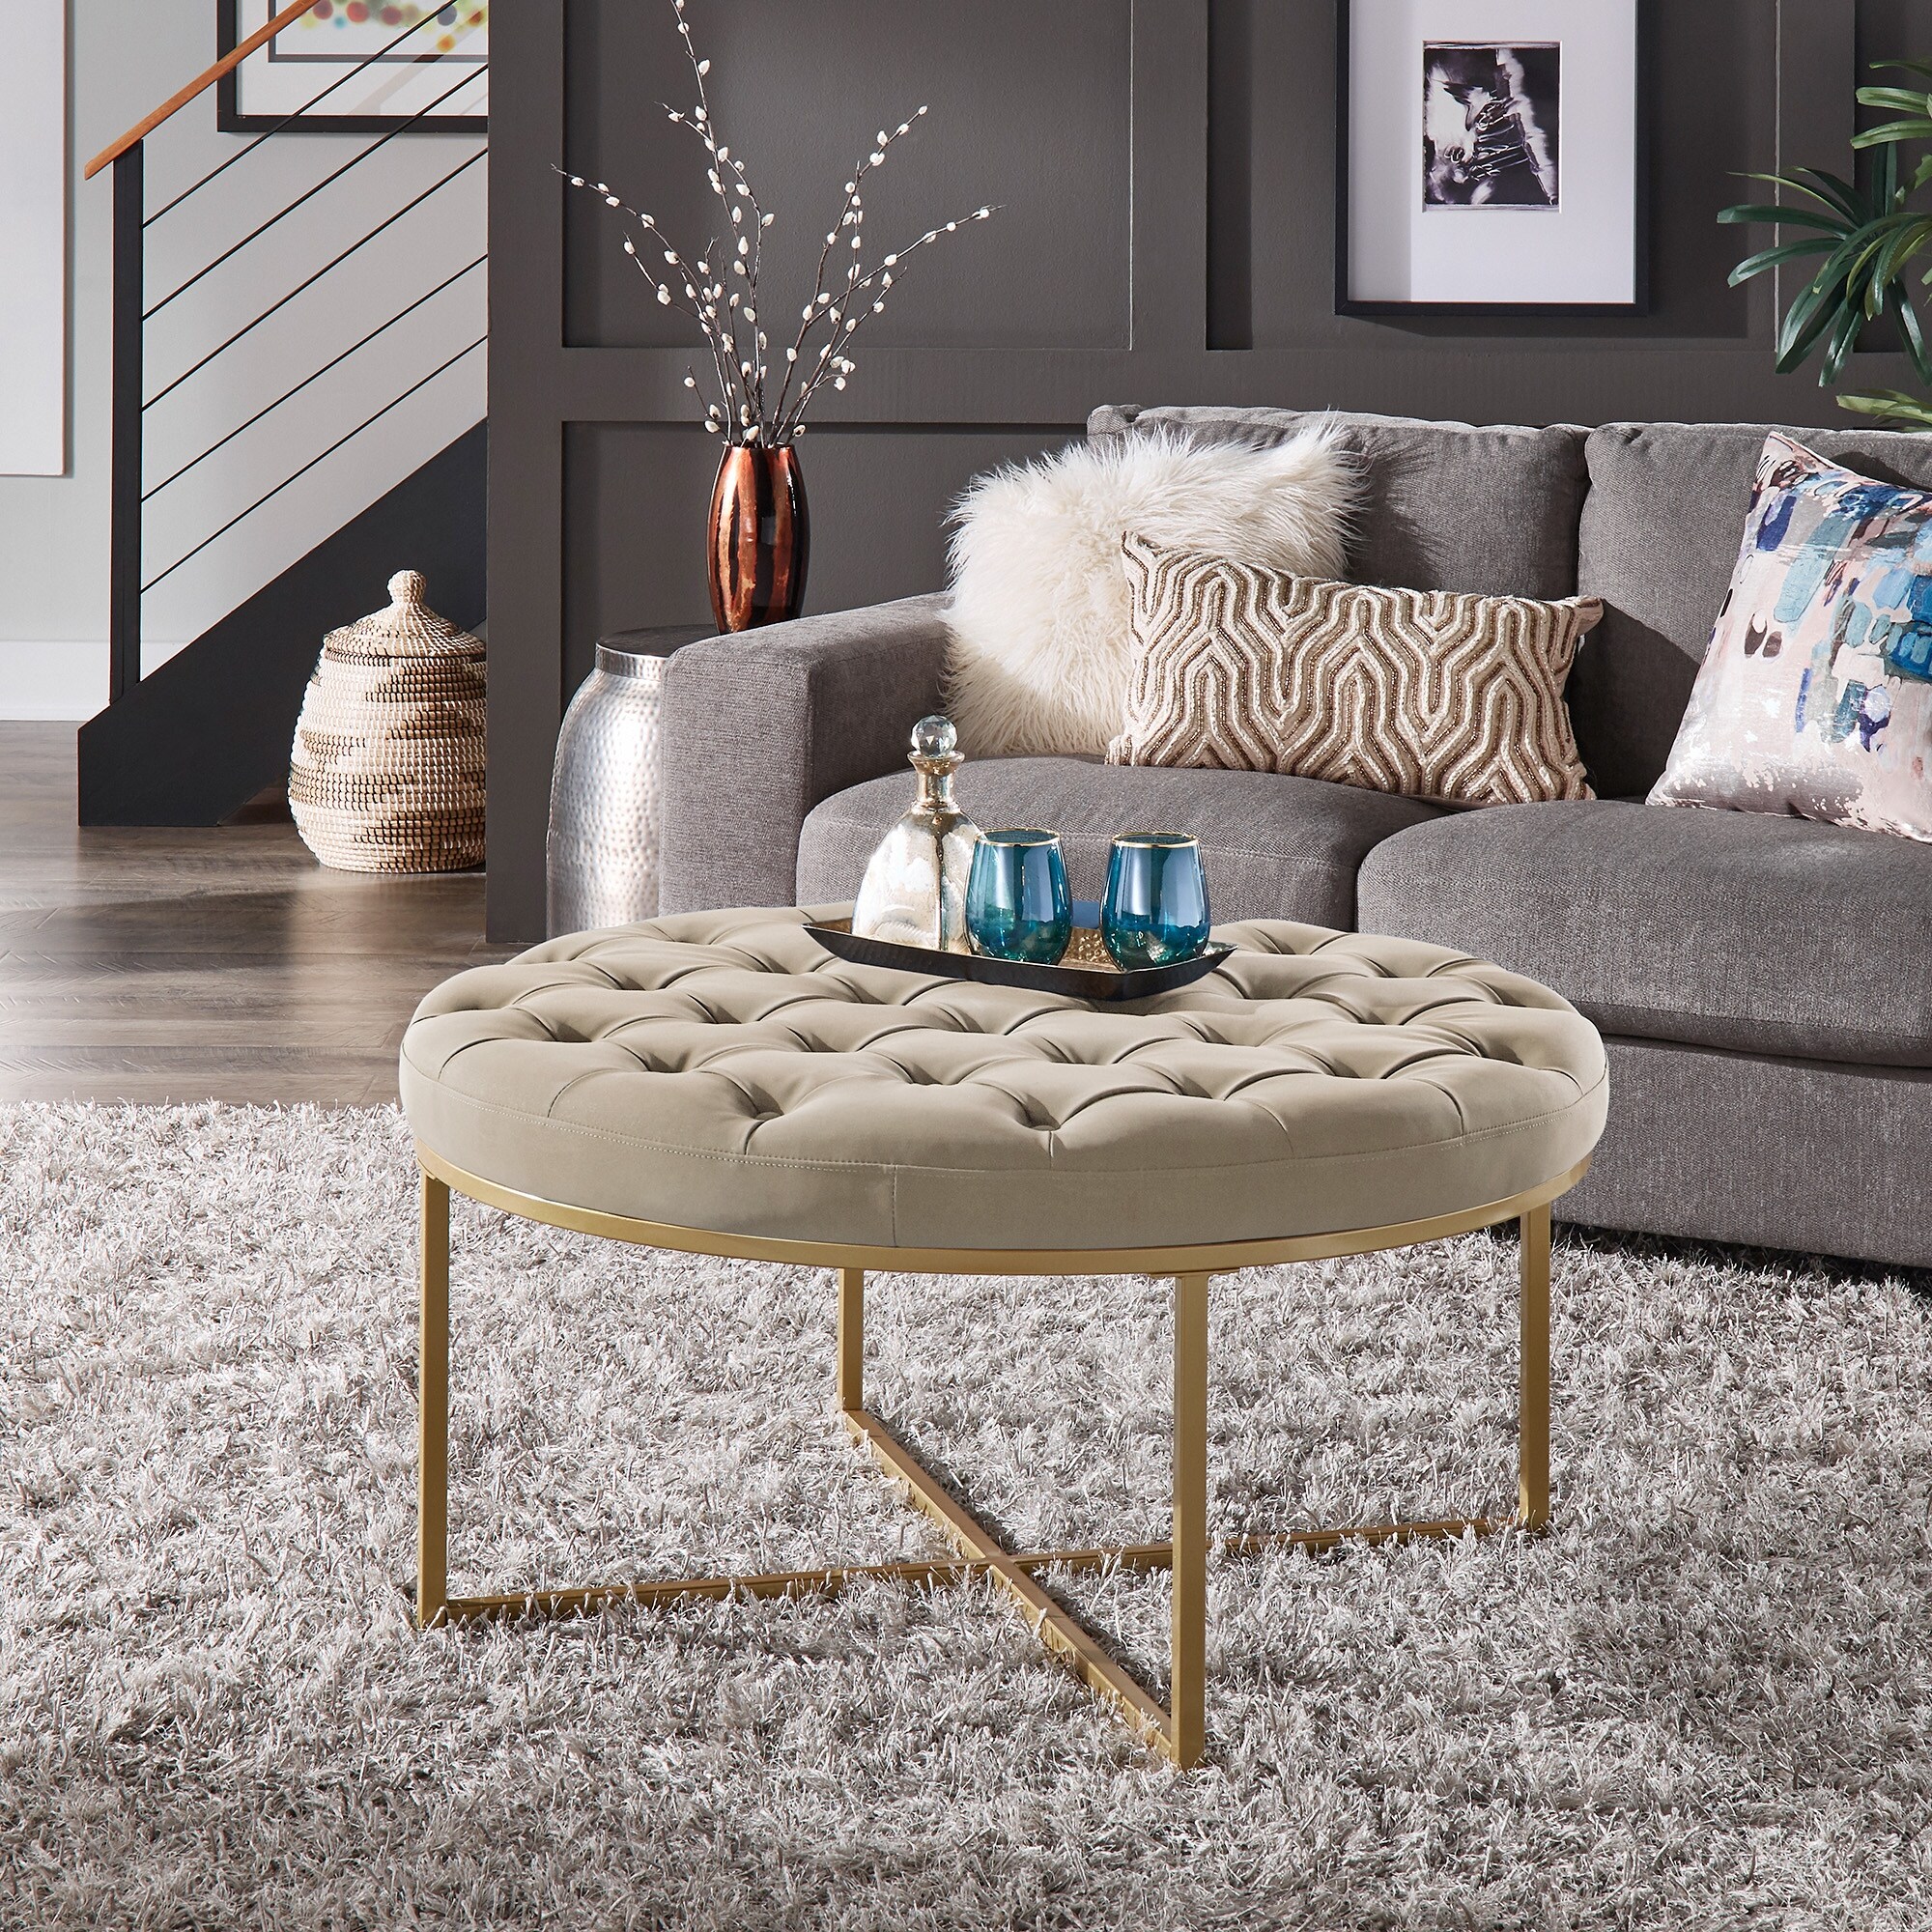 https://ak1.ostkcdn.com/images/products/is/images/direct/2149be3194782ef13f9272cc69ed90732d120ea0/Devin-Polished-Faux-Leather-Round-Tufted-Cocktail-Ottoman-by-iNSPIRE-Q-Modern.jpg